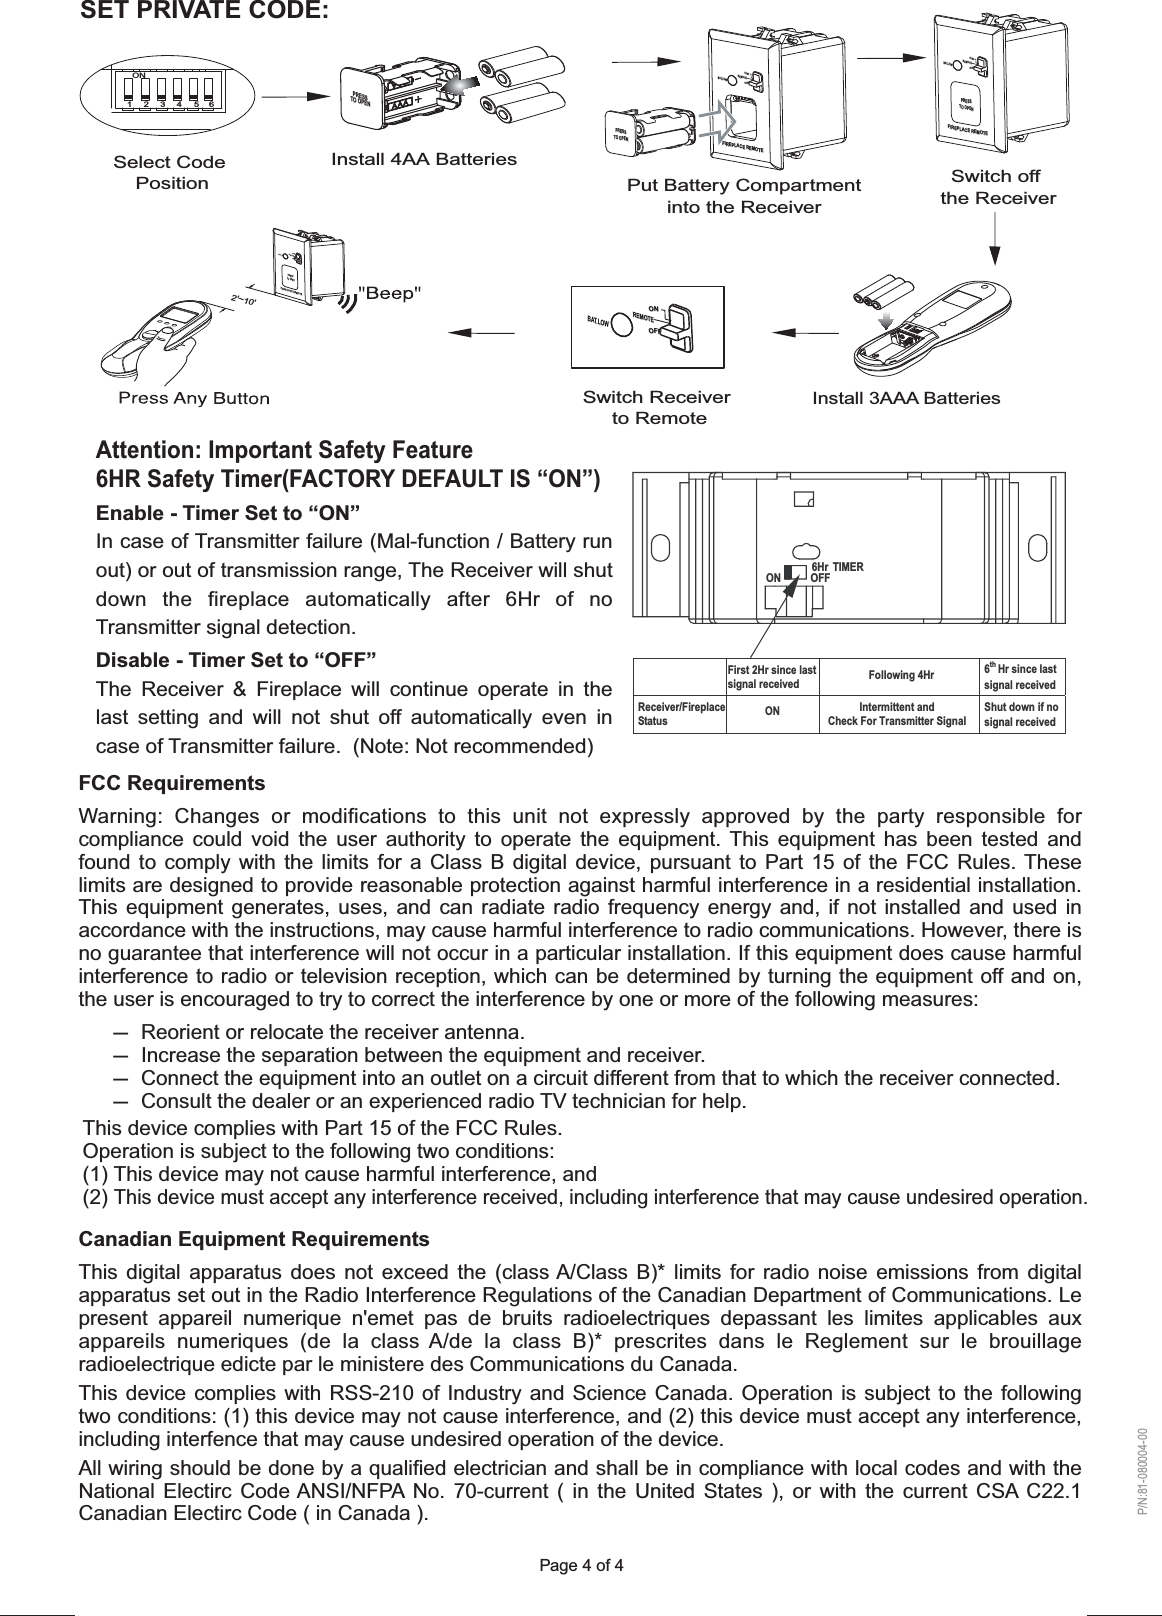 Page 4 of 4FCC RequirementsWarning: Changes or modifications to this unit not expressly approved by the party responsible for compliance could void the user authority to operate the equipment. This equipment has been tested and found to comply with the limits for a Class B digital device, pursuant to Part 15 of the FCC Rules. These limits are designed to provide reasonable protection against harmful interference in a residential installation. This equipment generates, uses, and can radiate radio frequency energy and, if not installed and used in accordance with the instructions, may cause harmful interference to radio communications. However, there is no guarantee that interference will not occur in a particular installation. If this equipment does cause harmful interference to radio or television reception, which can be determined by turning the equipment off and on, the user is encouraged to try to correct the interference by one or more of the following measures:-  Reorient or relocate the receiver antenna.-  Increase the separation between the equipment and receiver.-  Connect the equipment into an outlet on a circuit different from that to which the receiver connected.-  Consult the dealer or an experienced radio TV technician for help.Canadian Equipment RequirementsThis digital apparatus does not exceed the (class A/Class B)* limits for radio noise emissions from digital apparatus set out in the Radio Interference Regulations of the Canadian Department of Communications. Le present appareil numerique n&apos;emet pas de bruits radioelectriques depassant les limites applicables aux appareils numeriques (de la class A/de la class B)* prescrites dans le Reglement sur le brouillage radioelectrique edicte par le ministere des Communications du Canada.This device complies with RSS-210 of Industry and Science Canada. Operation is subject to the following two conditions: (1) this device may not cause interference, and (2) this device must accept any interference, including interfence that may cause undesired operation of the device. All wiring should be done by a qualified electrician and shall be in compliance with local codes and with the National Electirc Code ANSI/NFPA No. 70-current ( in the United States ), or with the current CSA C22.1 Canadian Electirc Code ( in Canada ).SET PRIVATE CODE:Install 4AA BatteriesPut Battery Compartmentinto the ReceiverSwitch Receiver to RemoteSwitch offthe ReceiverInstall 3AAA BatteriesSelect Code Position1234  5   6ON2&apos;~10&apos;FIREPLACE REMOTEPRESSTO OPENOFFONREMOTEBAT.LOWOFFONREMOTEBAT.LOWFIREPLACE REMOTEPRESSTO OPENOFFONREMOTEBAT.LOWFIREPLACE REMOTEPRESSTO OPENOFFONREMOTEBAT.LOWPRESSTO OPENP/N:81-080004-00This device complies with Part 15 of the FCC Rules.Operation is subject to the following two conditions:(1) This device may not cause harmful interference, and(2) This device must accept any interference received, including interference that may cause undesired operation.TIMERON OFF6HrFirst 2Hr since last signal received Following 4Hr 6th Hr since last signal receivedReceiver/Fireplace Status ON Intermittent andCheck For Transmitter SignalShut down if no signal receivedAttention: Important Safety Feature6HR Safety Timer(FACTORY DEFAULT IS “ON”)Enable - Timer Set to “ON”In case of Transmitter failure (Mal-function / Battery run out) or out of transmission range, The Receiver will shut down the fireplace automatically after 6Hr of no Transmitter signal detection.  Disable - Timer Set to “OFF”The Receiver &amp; Fireplace will continue operate in the last setting and will not shut off automatically even in case of Transmitter failure.  (Note: Not recommended)